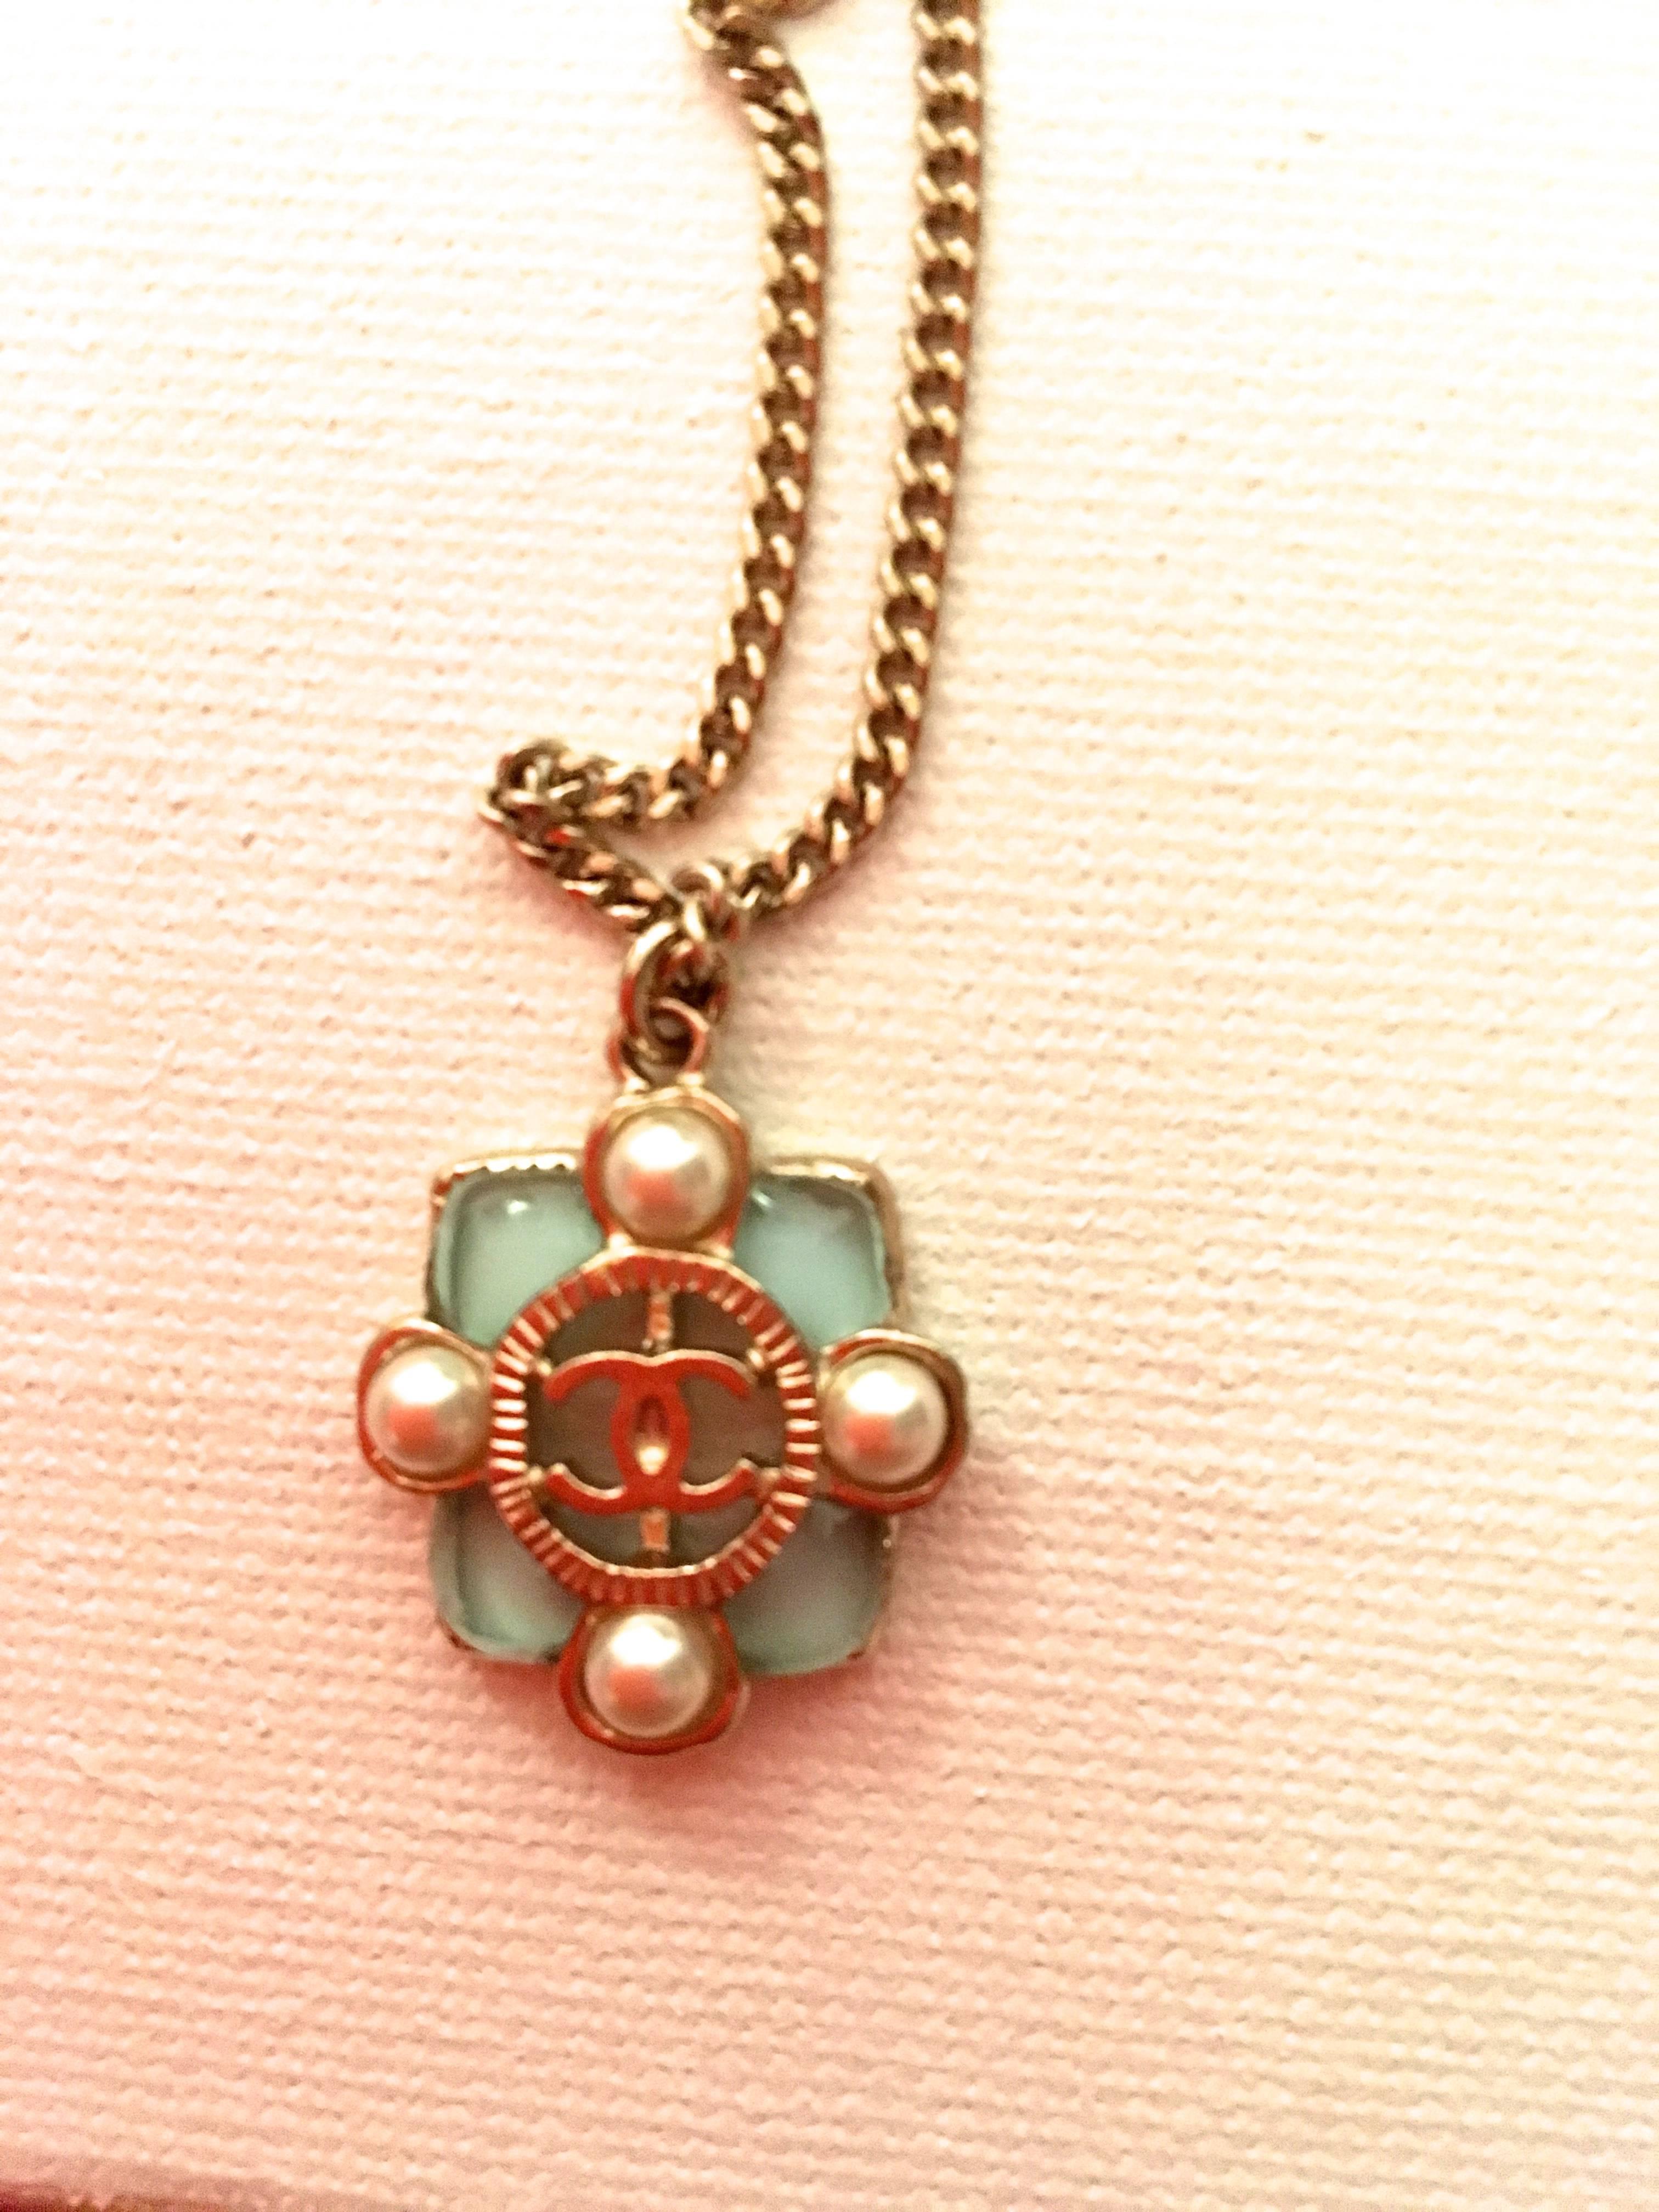 Presented here is a new Chanel medallion necklace from the 2015 collection. The medallion is comprised of a square medallion with a pearl on each side of the square. On each corner of the medallion there is a gripoix stone that is light blue. The